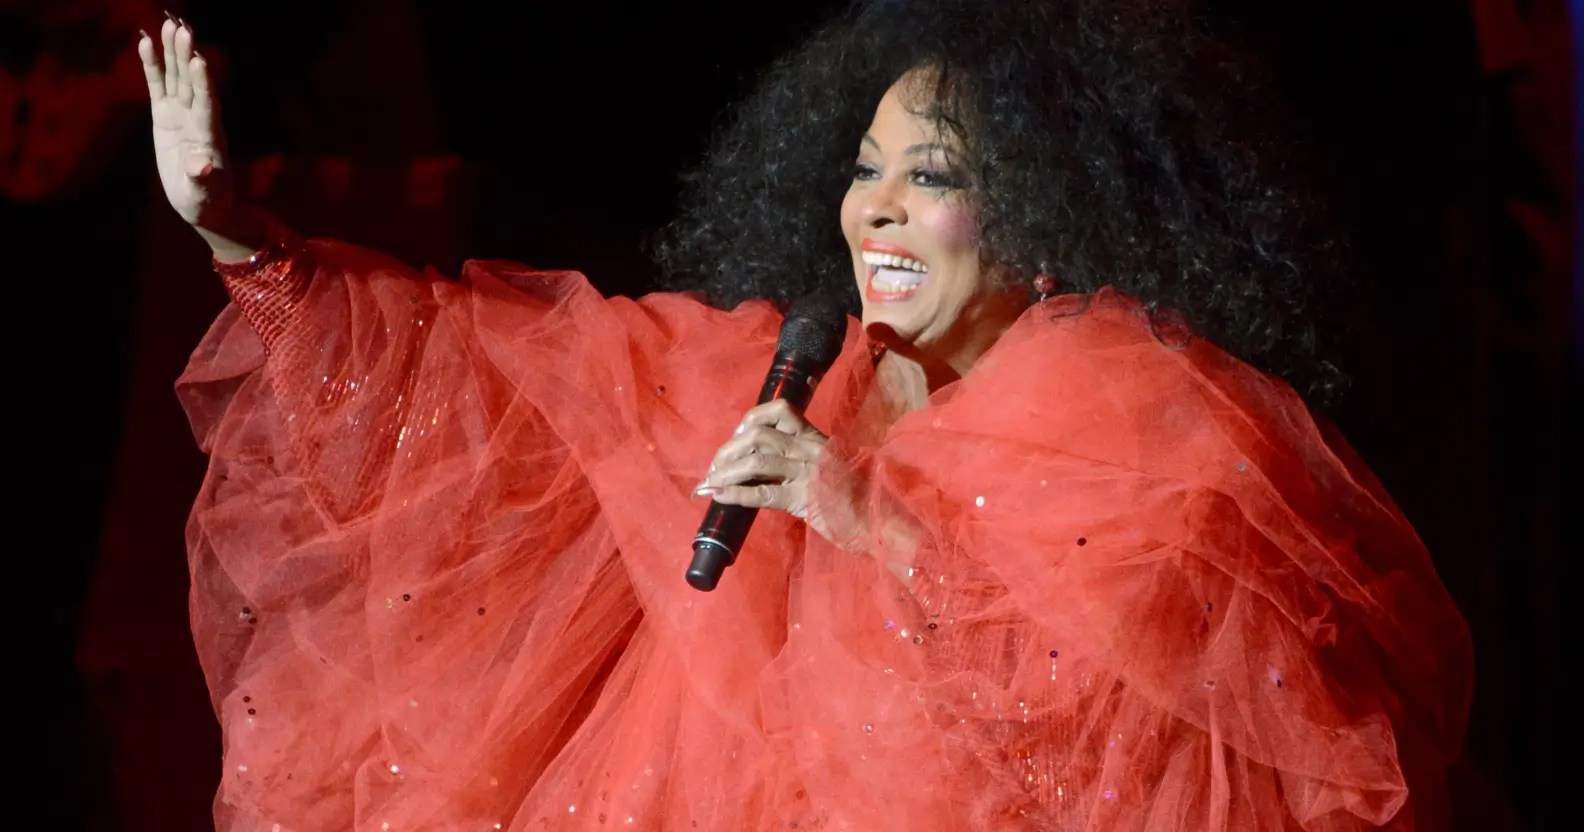 Diana Ross in a red dress performing on stage in concert.